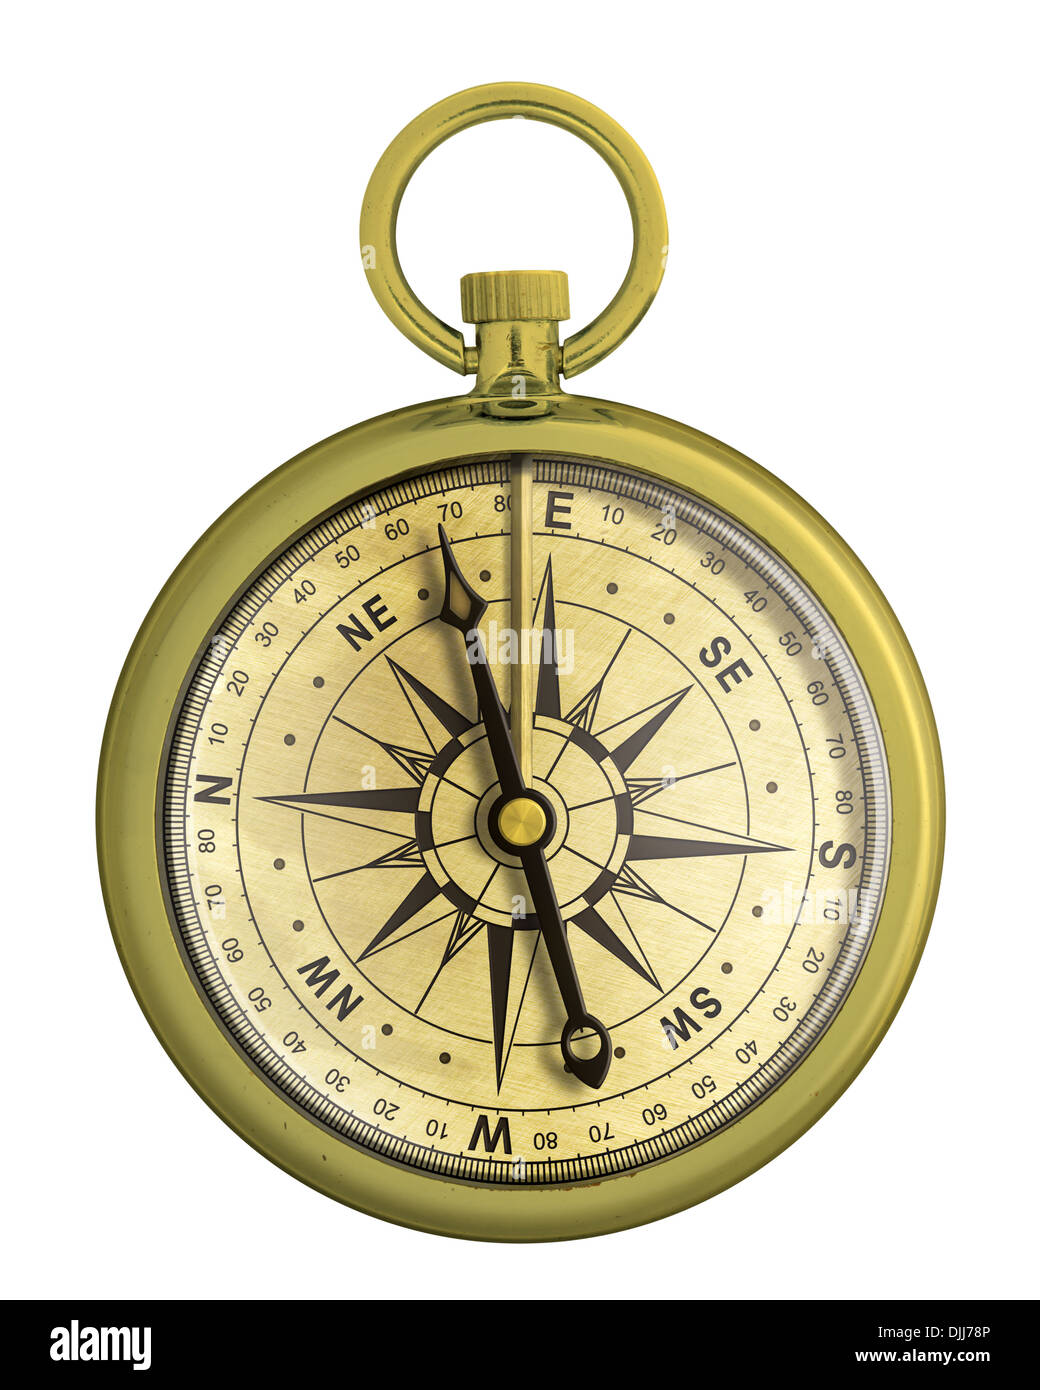 old gold compass nautical isolated Stock Photo